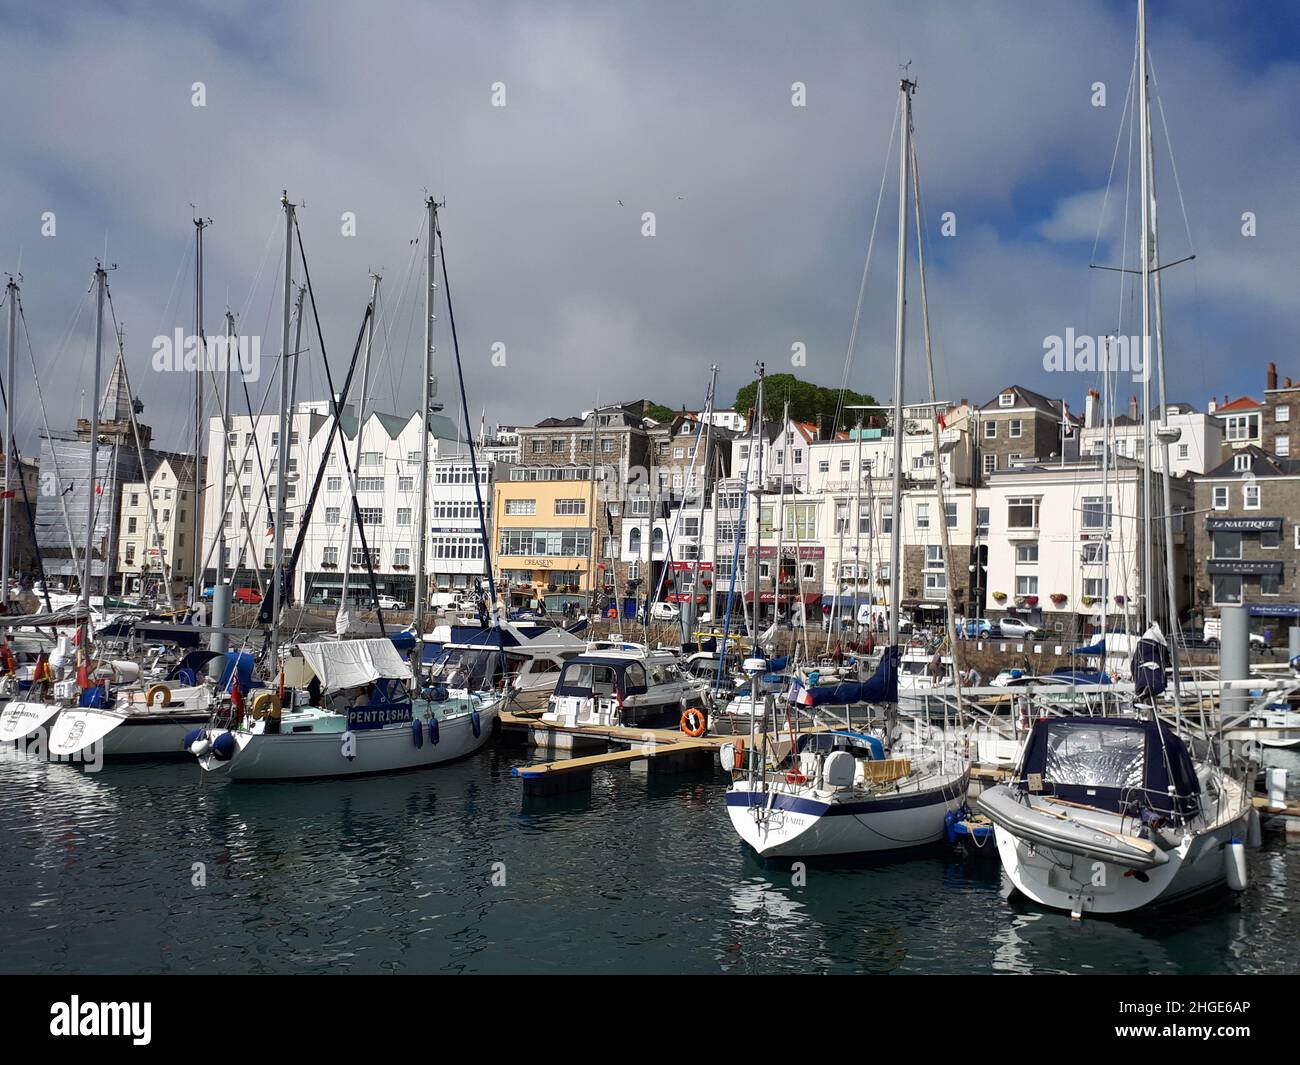 St Peter Port, Guernsey, Channel Islands: Victoria Marina Stock Photo